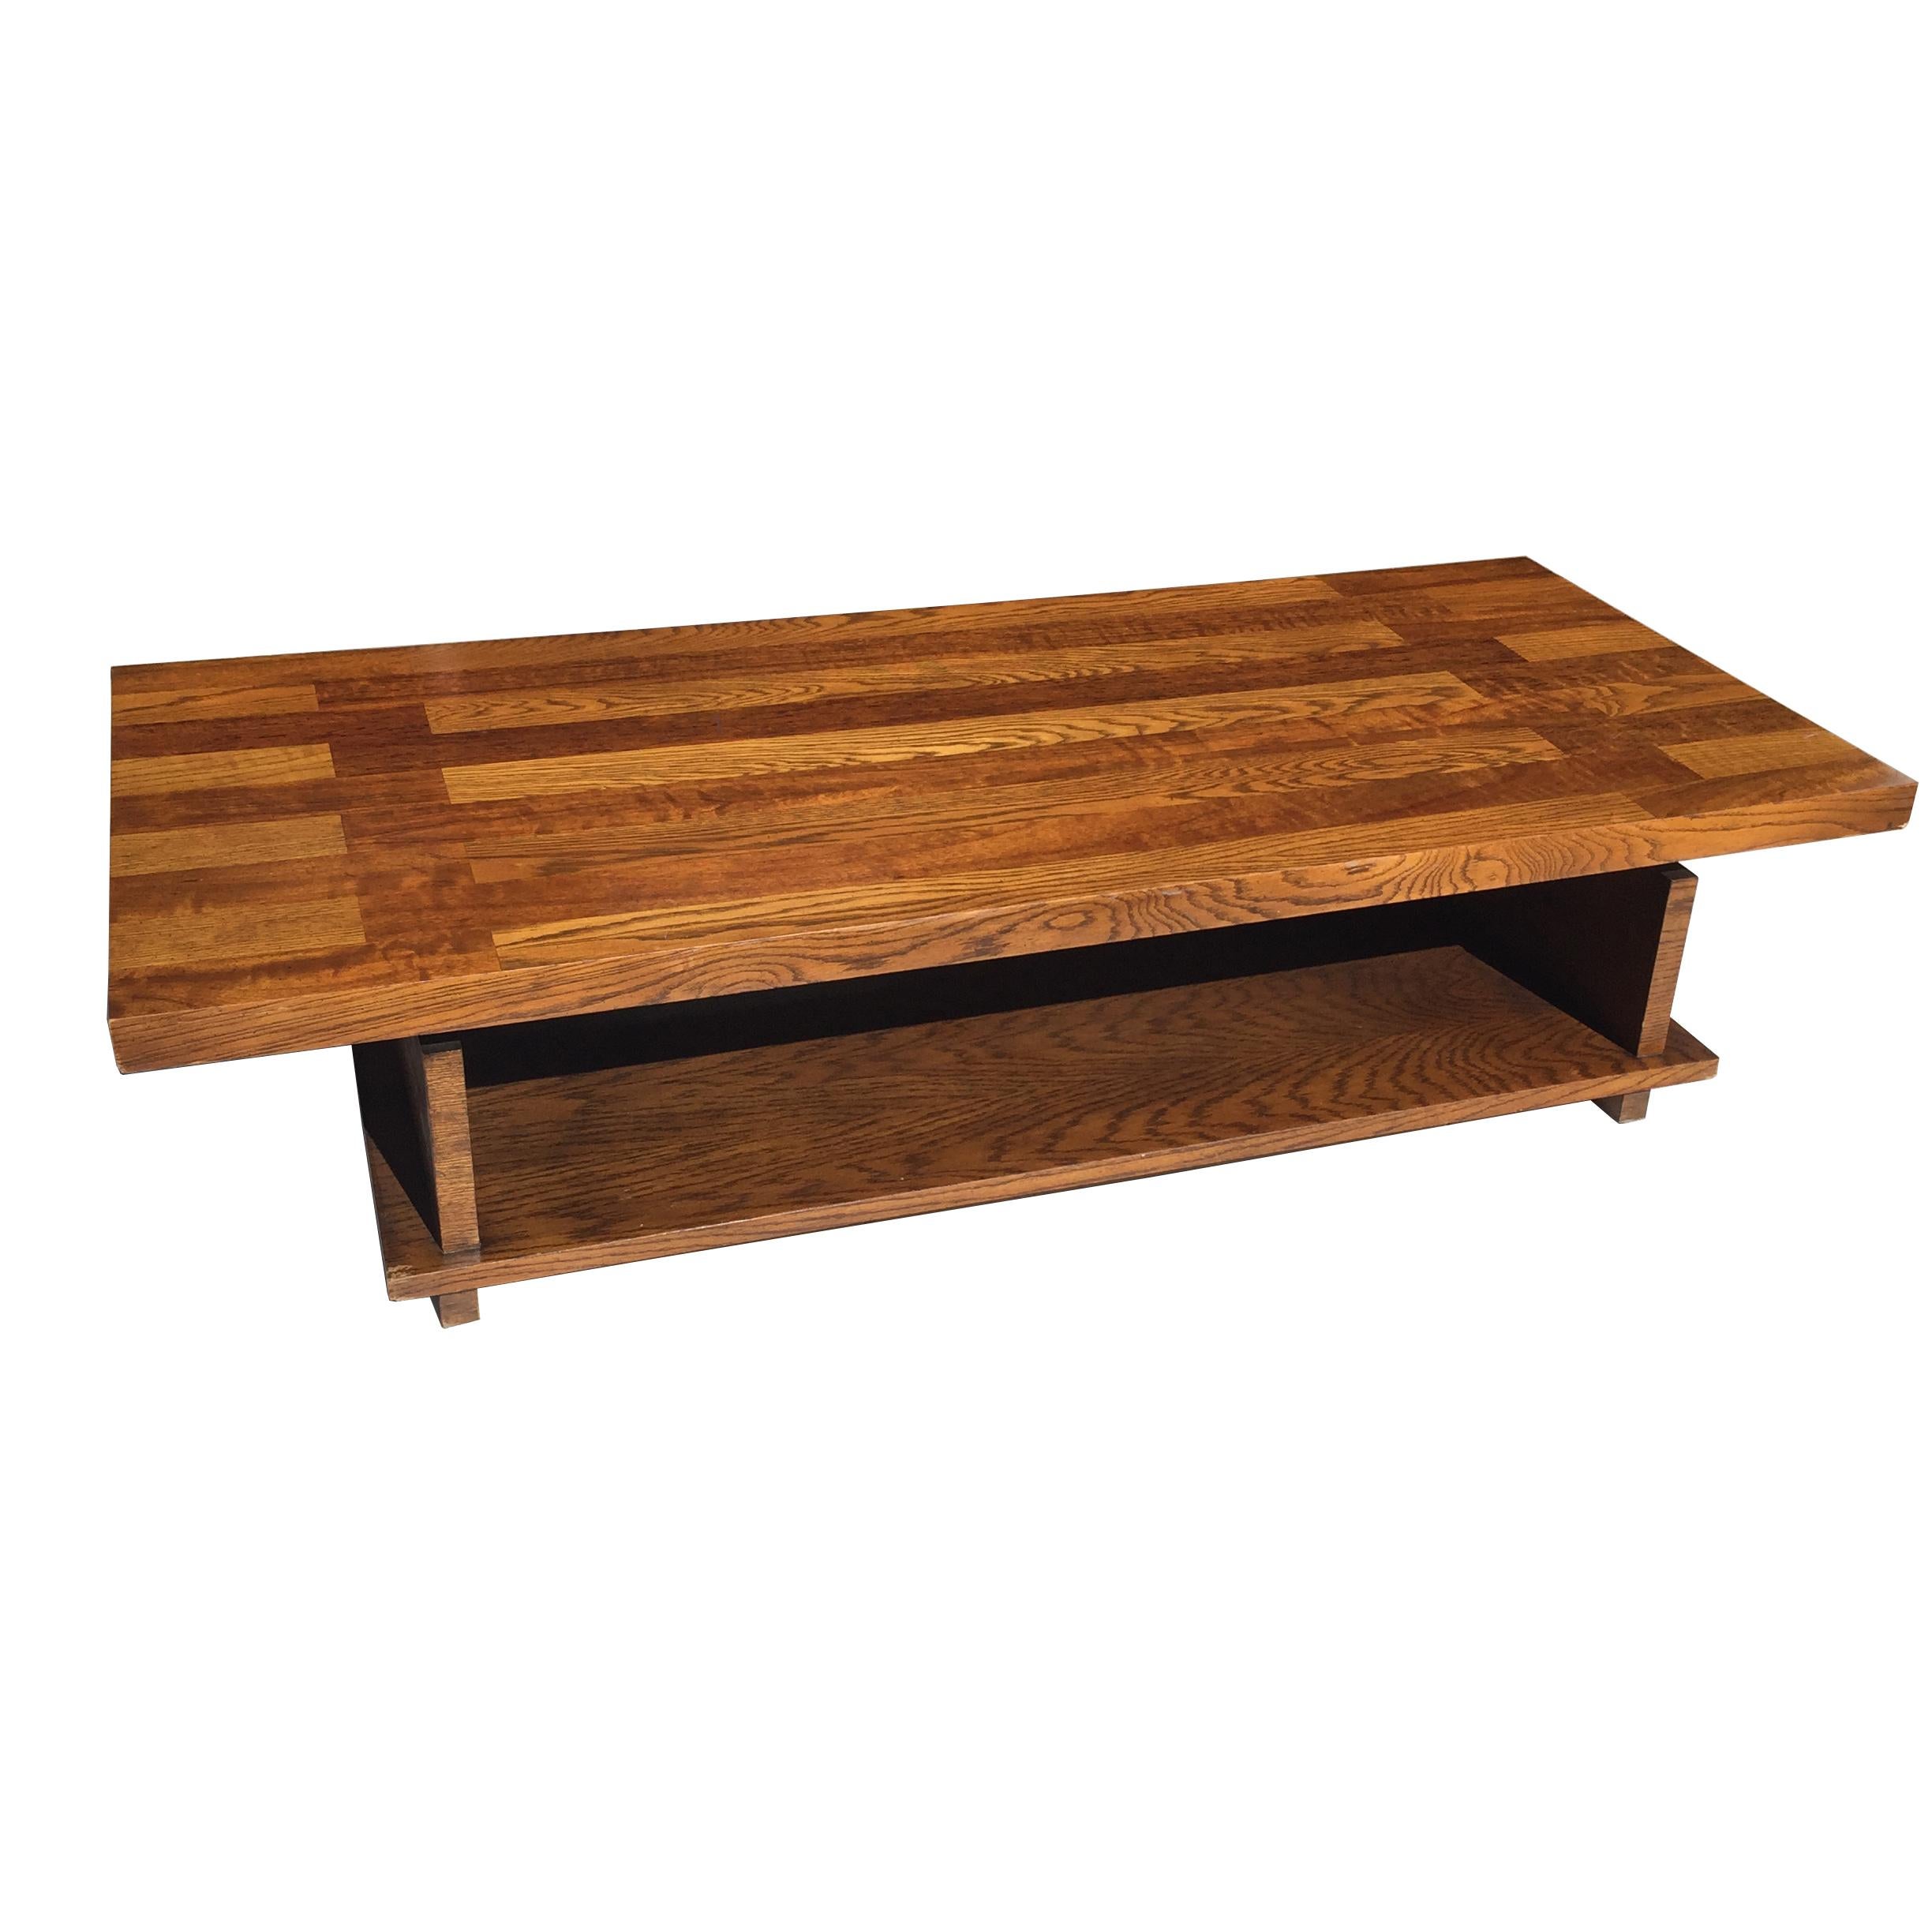 Lane midcentury plank trestle coffee table

Constructed of contrasting oak and walnut planks in a midcentury design
Two-tier.

